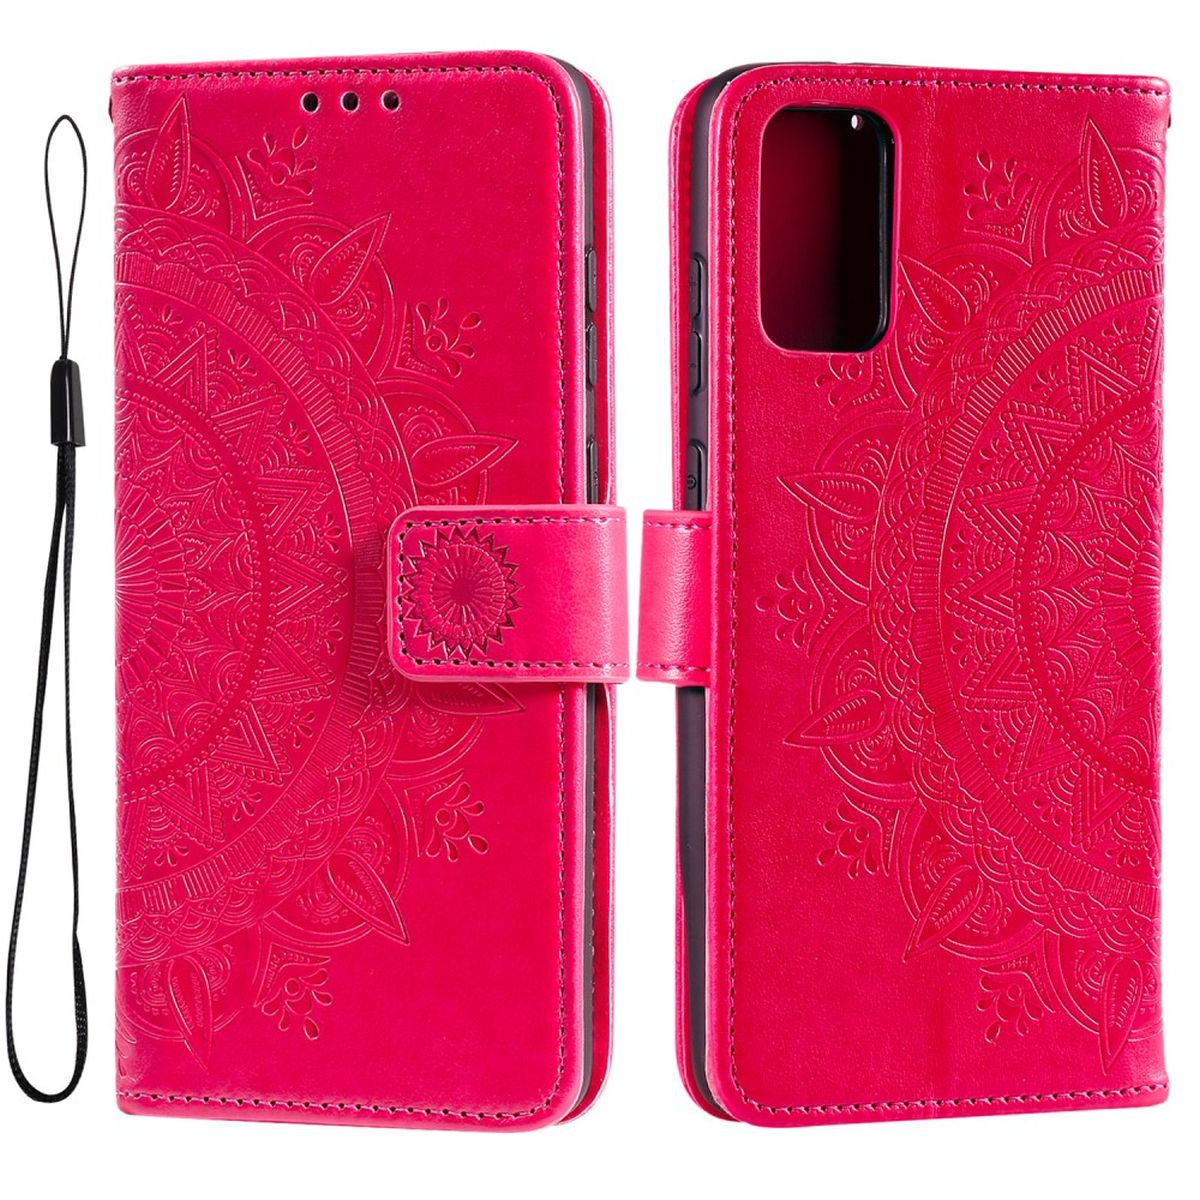 A33 Mandala Galaxy Muster, mit Pink 5G, Samsung, Bookcover, Klapphülle COVERKINGZ